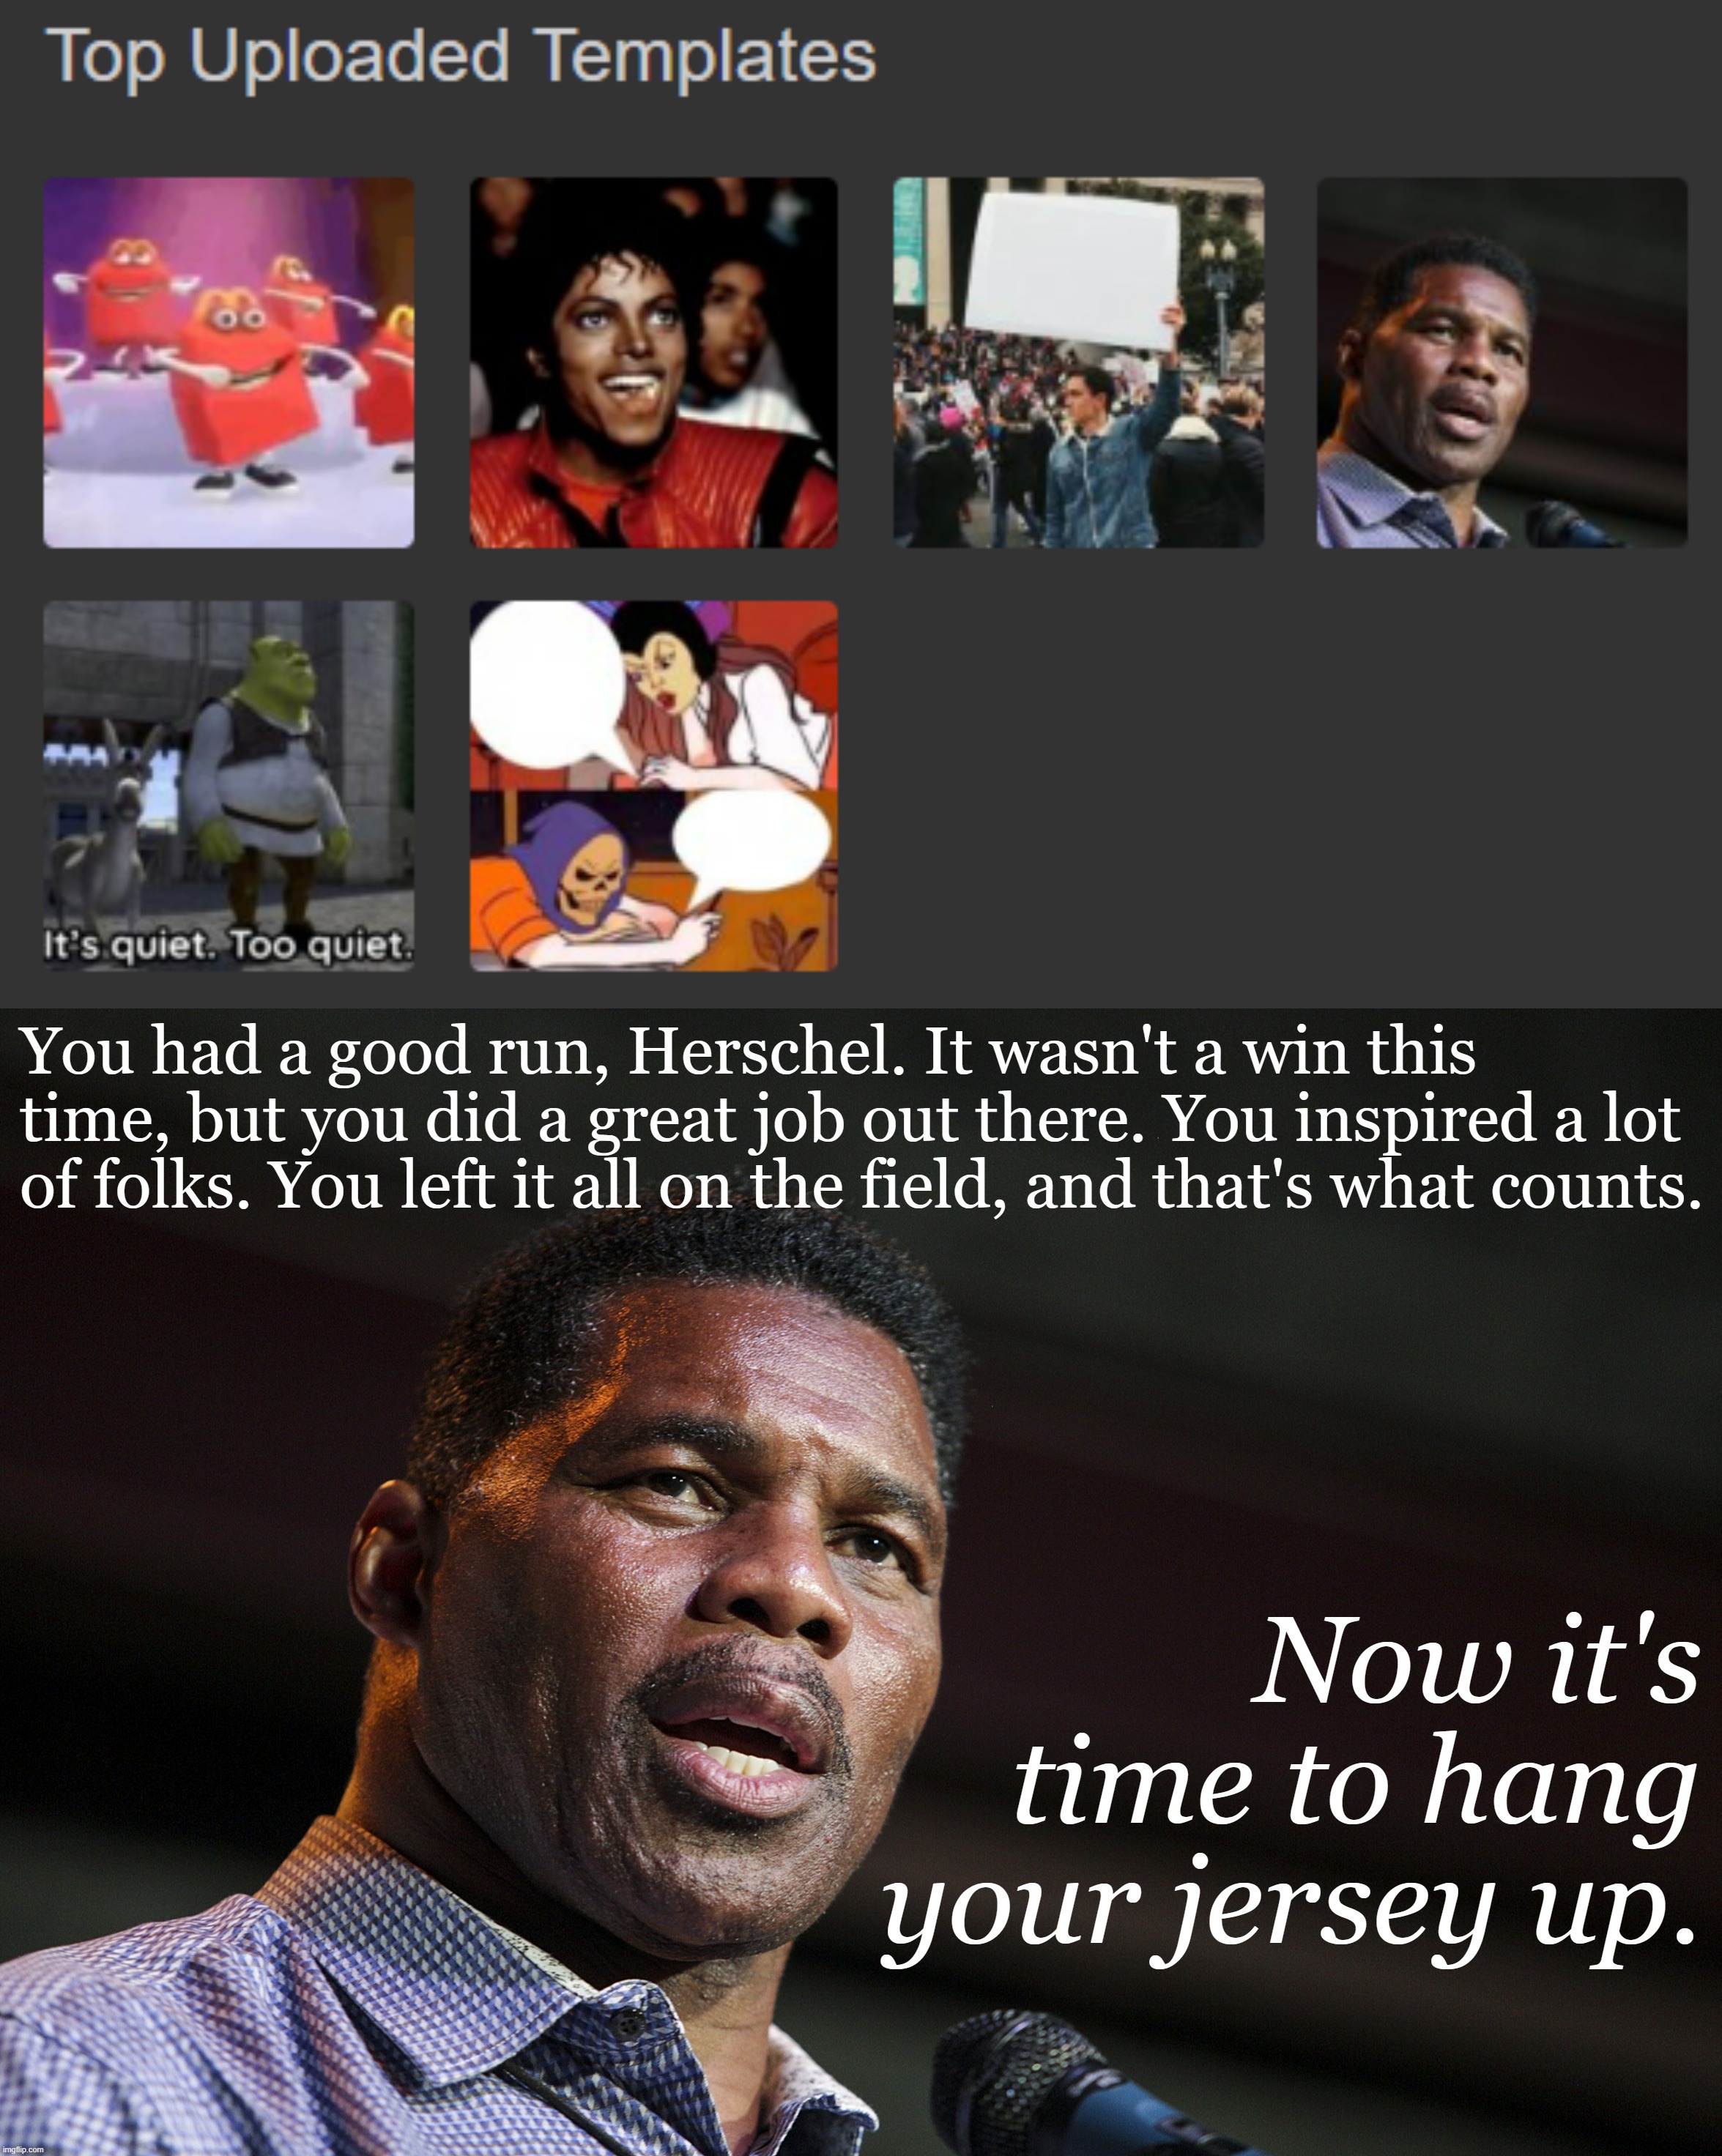 And now for a barrage of sports cliches to send off one of my top uploaded templates. | You had a good run, Herschel. It wasn't a win this time, but you did a great job out there. You inspired a lot of folks. You left it all on the field, and that's what counts. Now it's time to hang your jersey up. | image tagged in herschel walker top uploaded templates,herschel walker,templates,top templates,left it all on the field,thats what counts | made w/ Imgflip meme maker